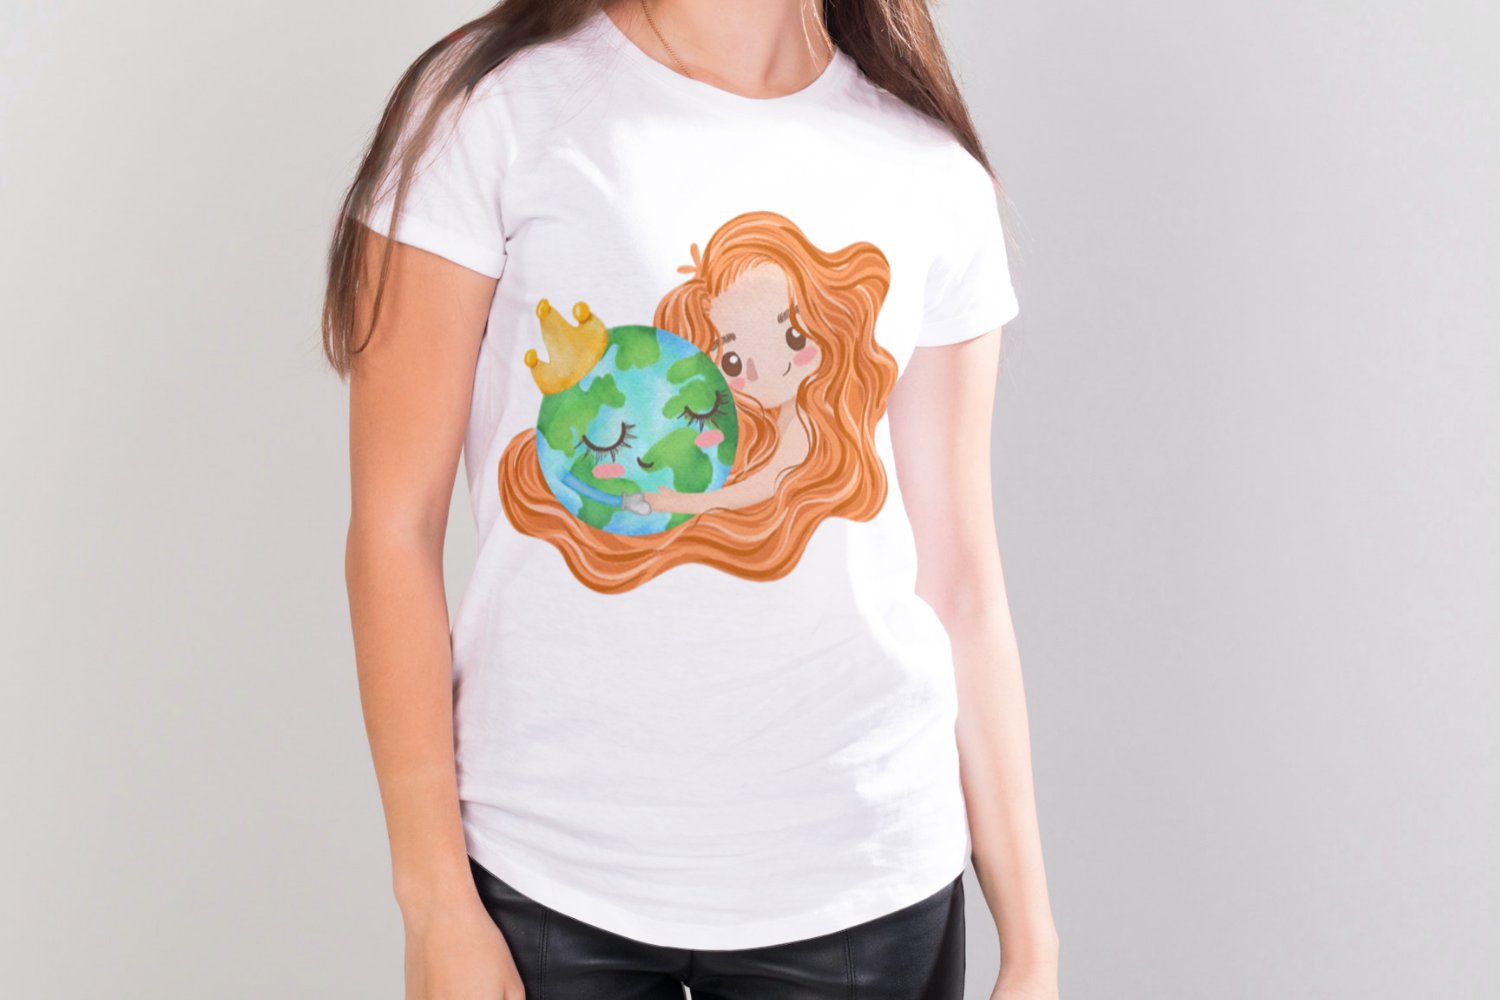 White t-shirt with a ginger girl and planet in her hug.